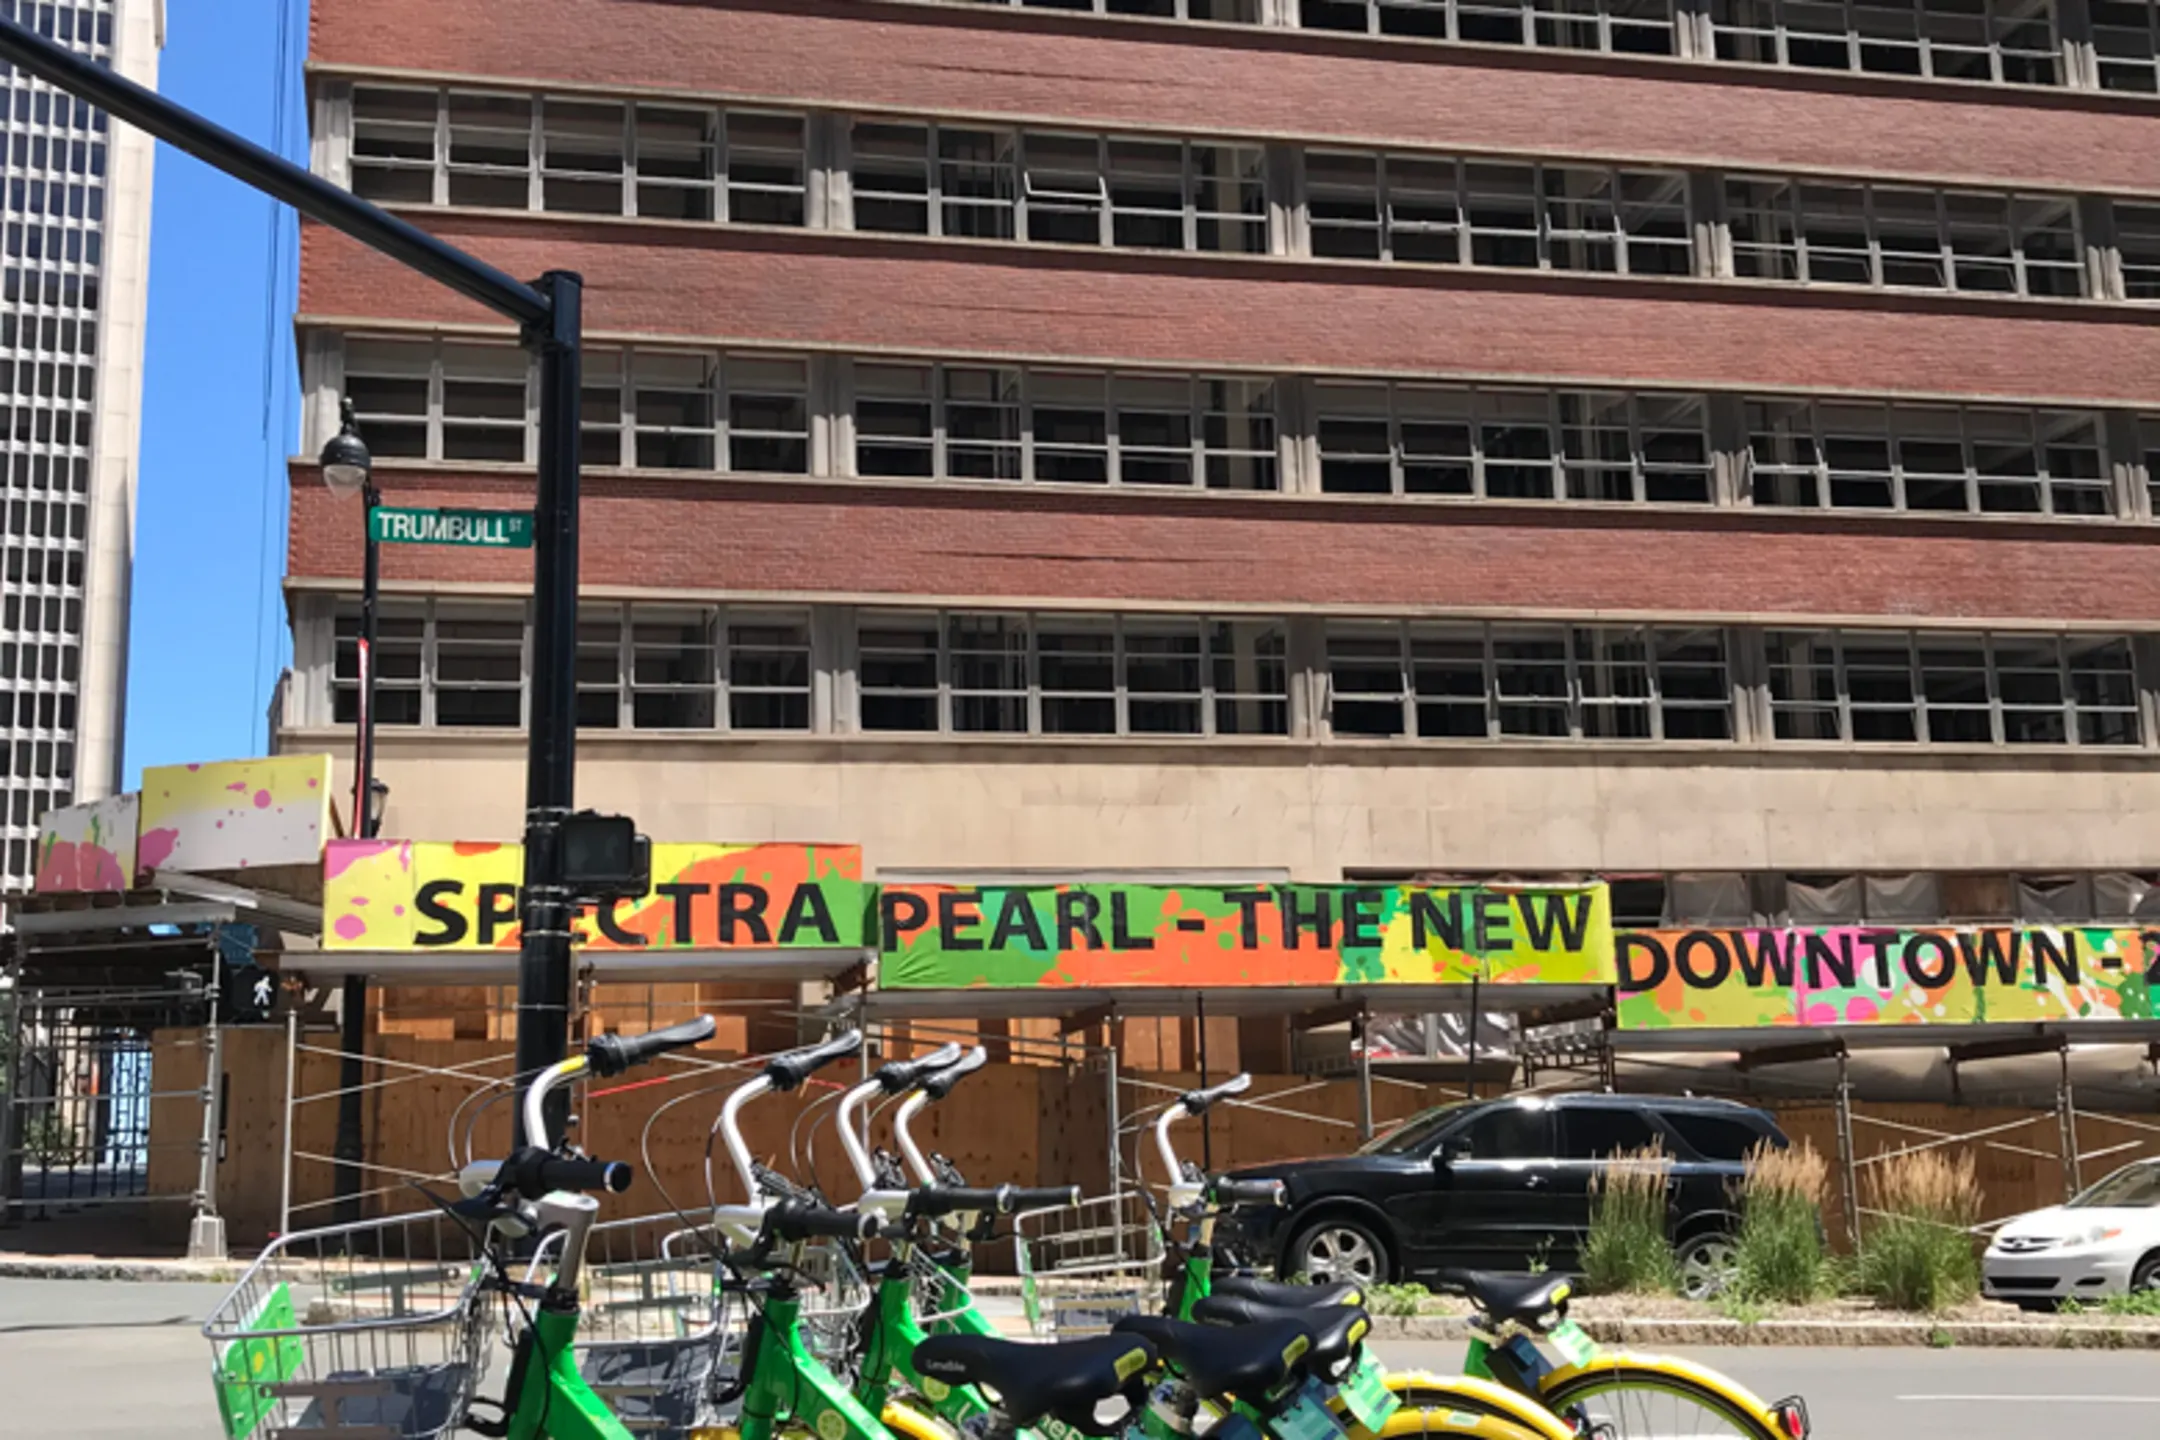 Building - Spectra Pearl Apartments - Hartford, CT